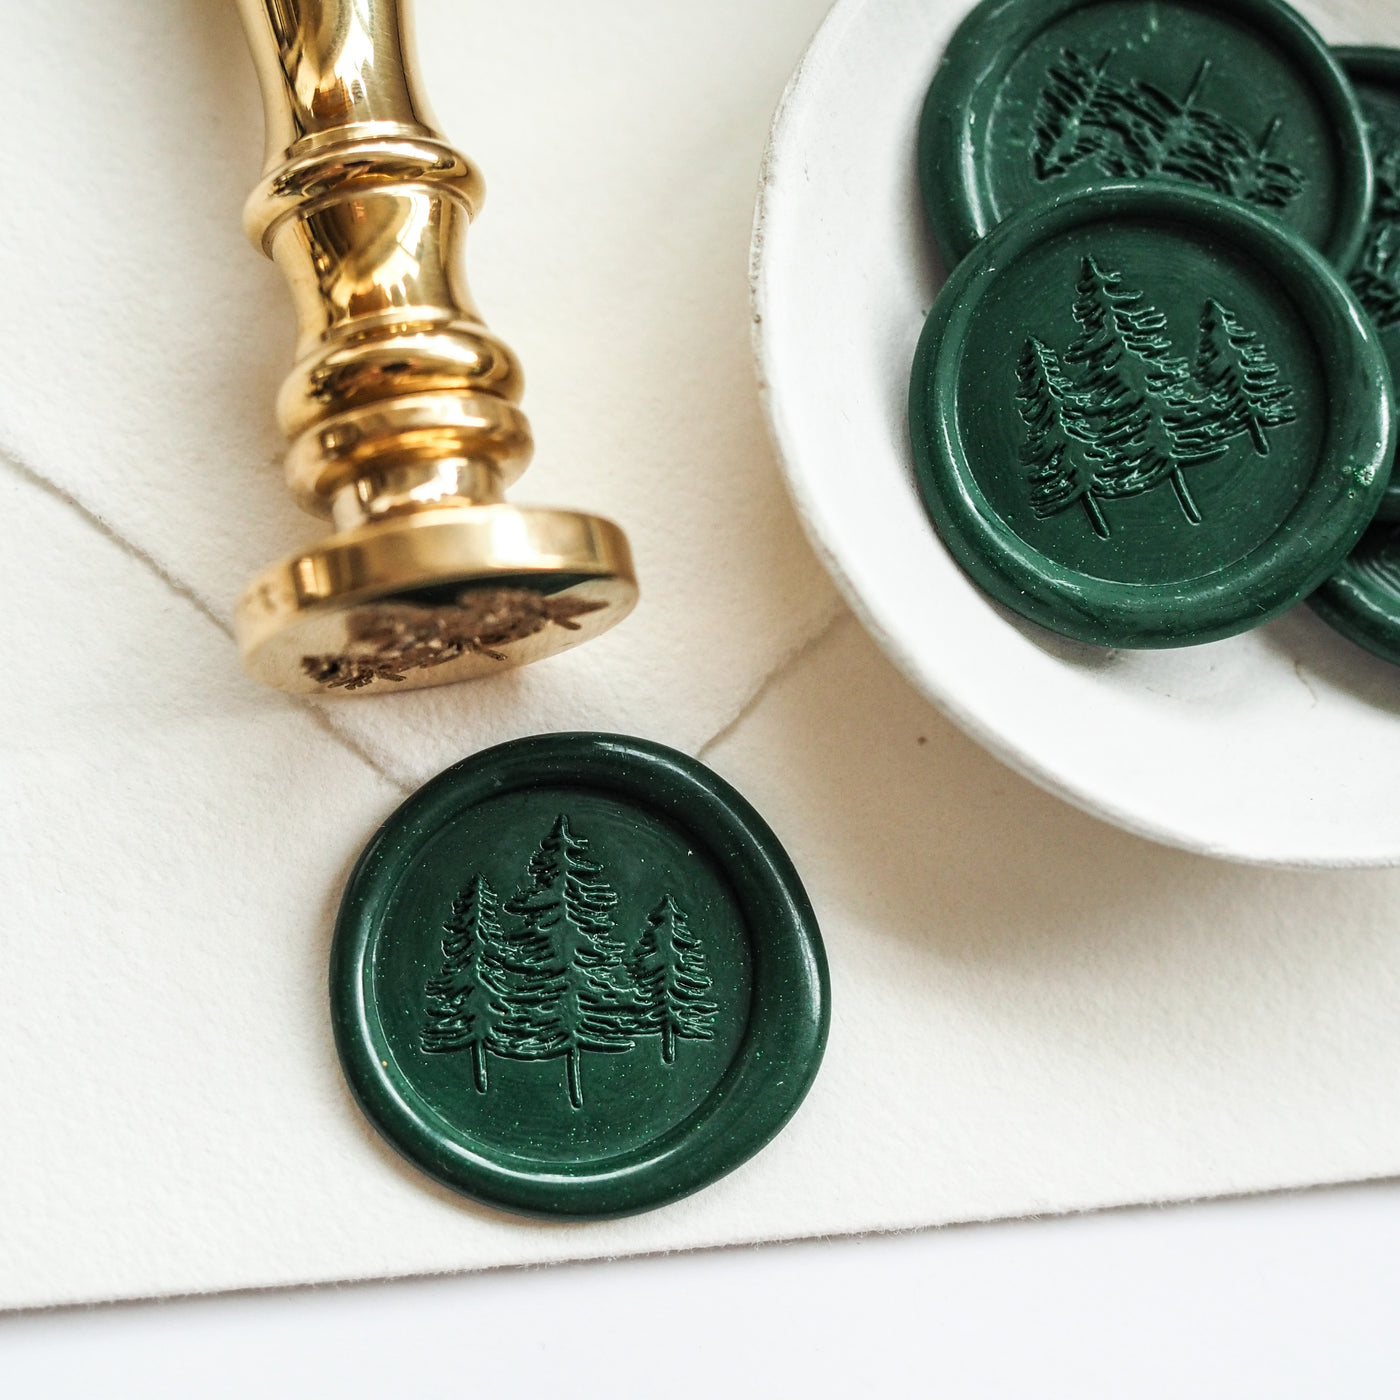 FIR TREE WAX SEAL STAMP - 'BELIEVE' CHRISTMAS COLLECTION